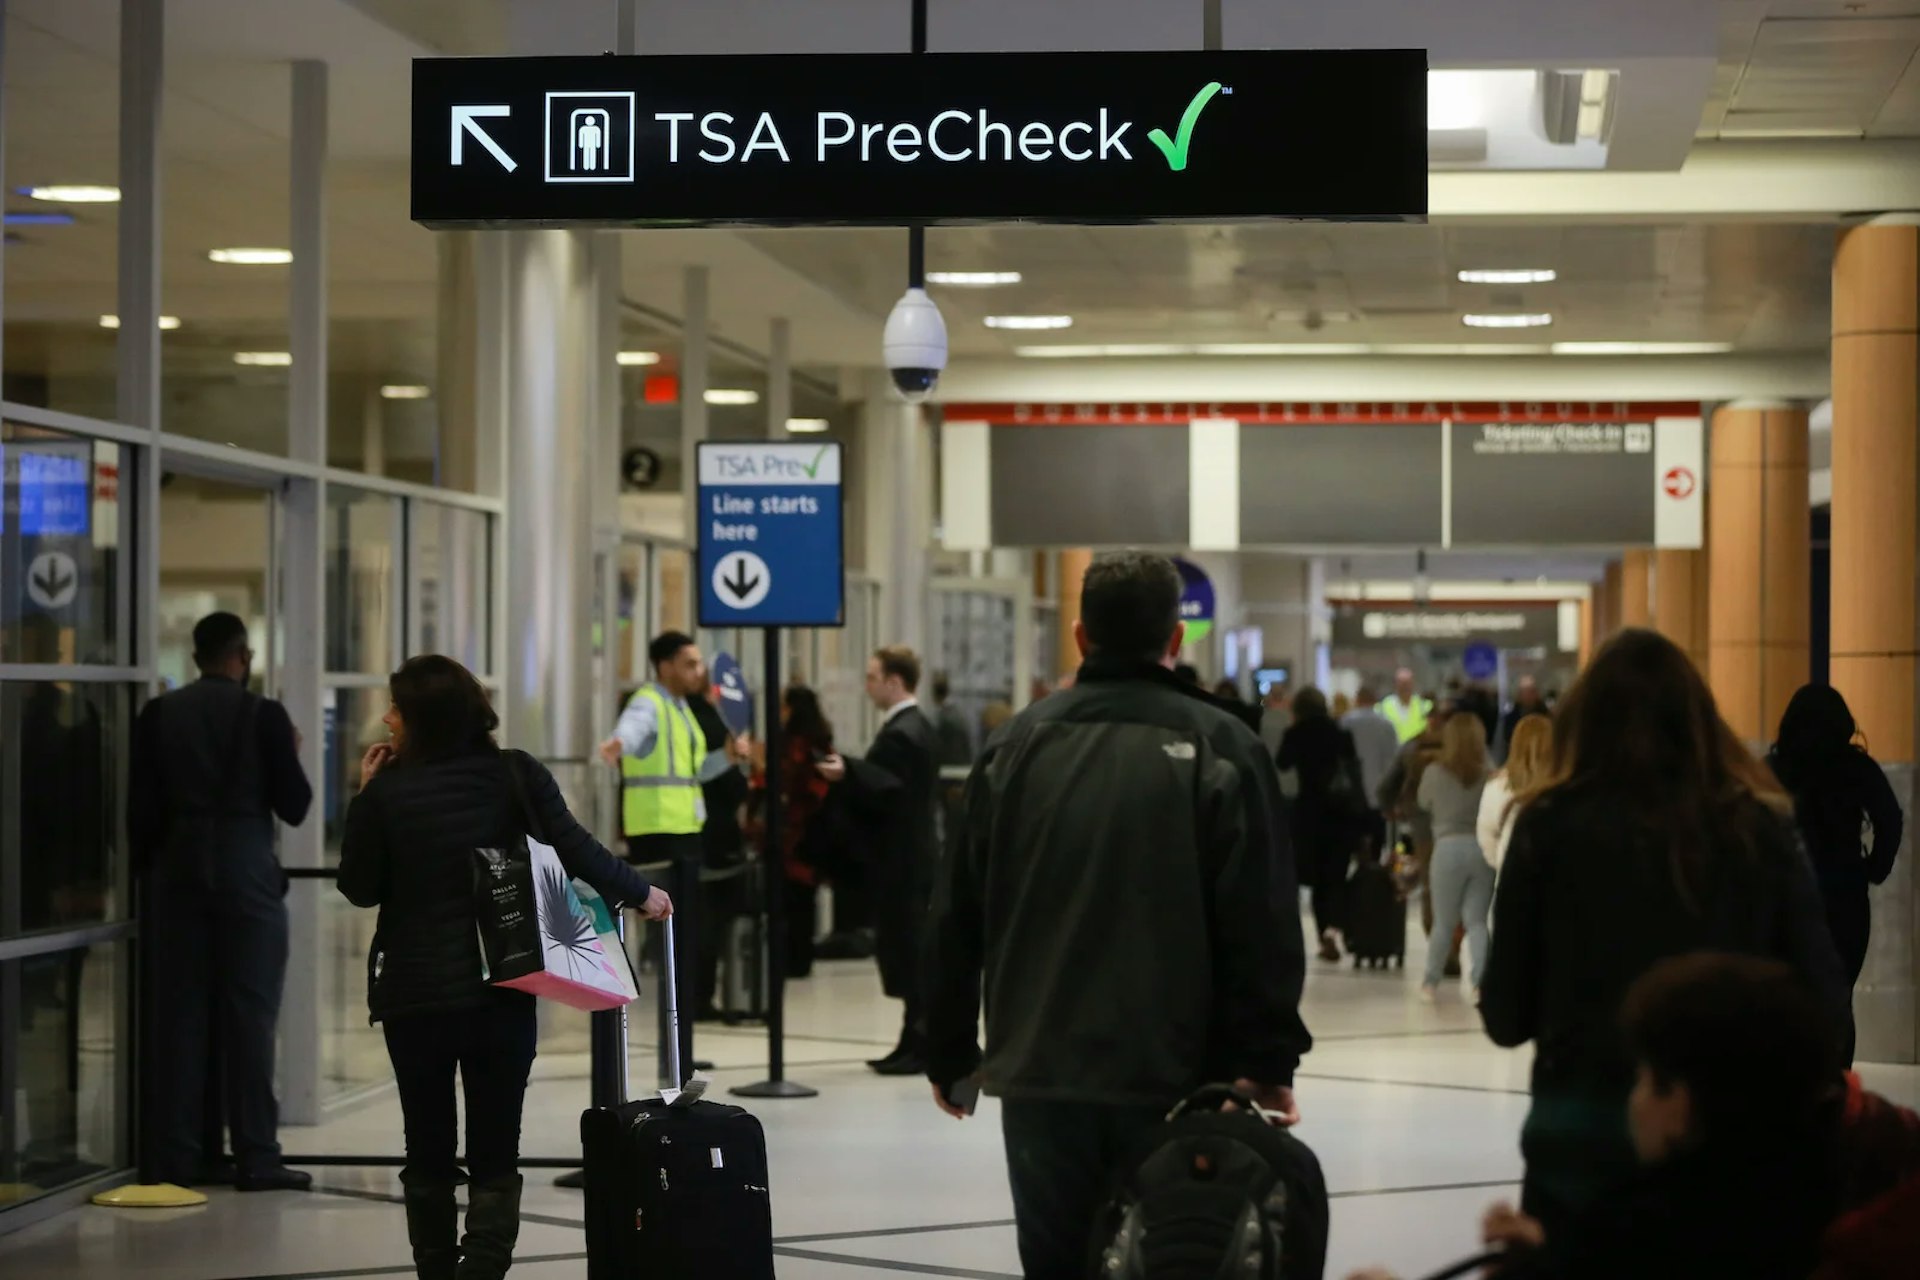 TSA PreCheck will ease your travels and help save time